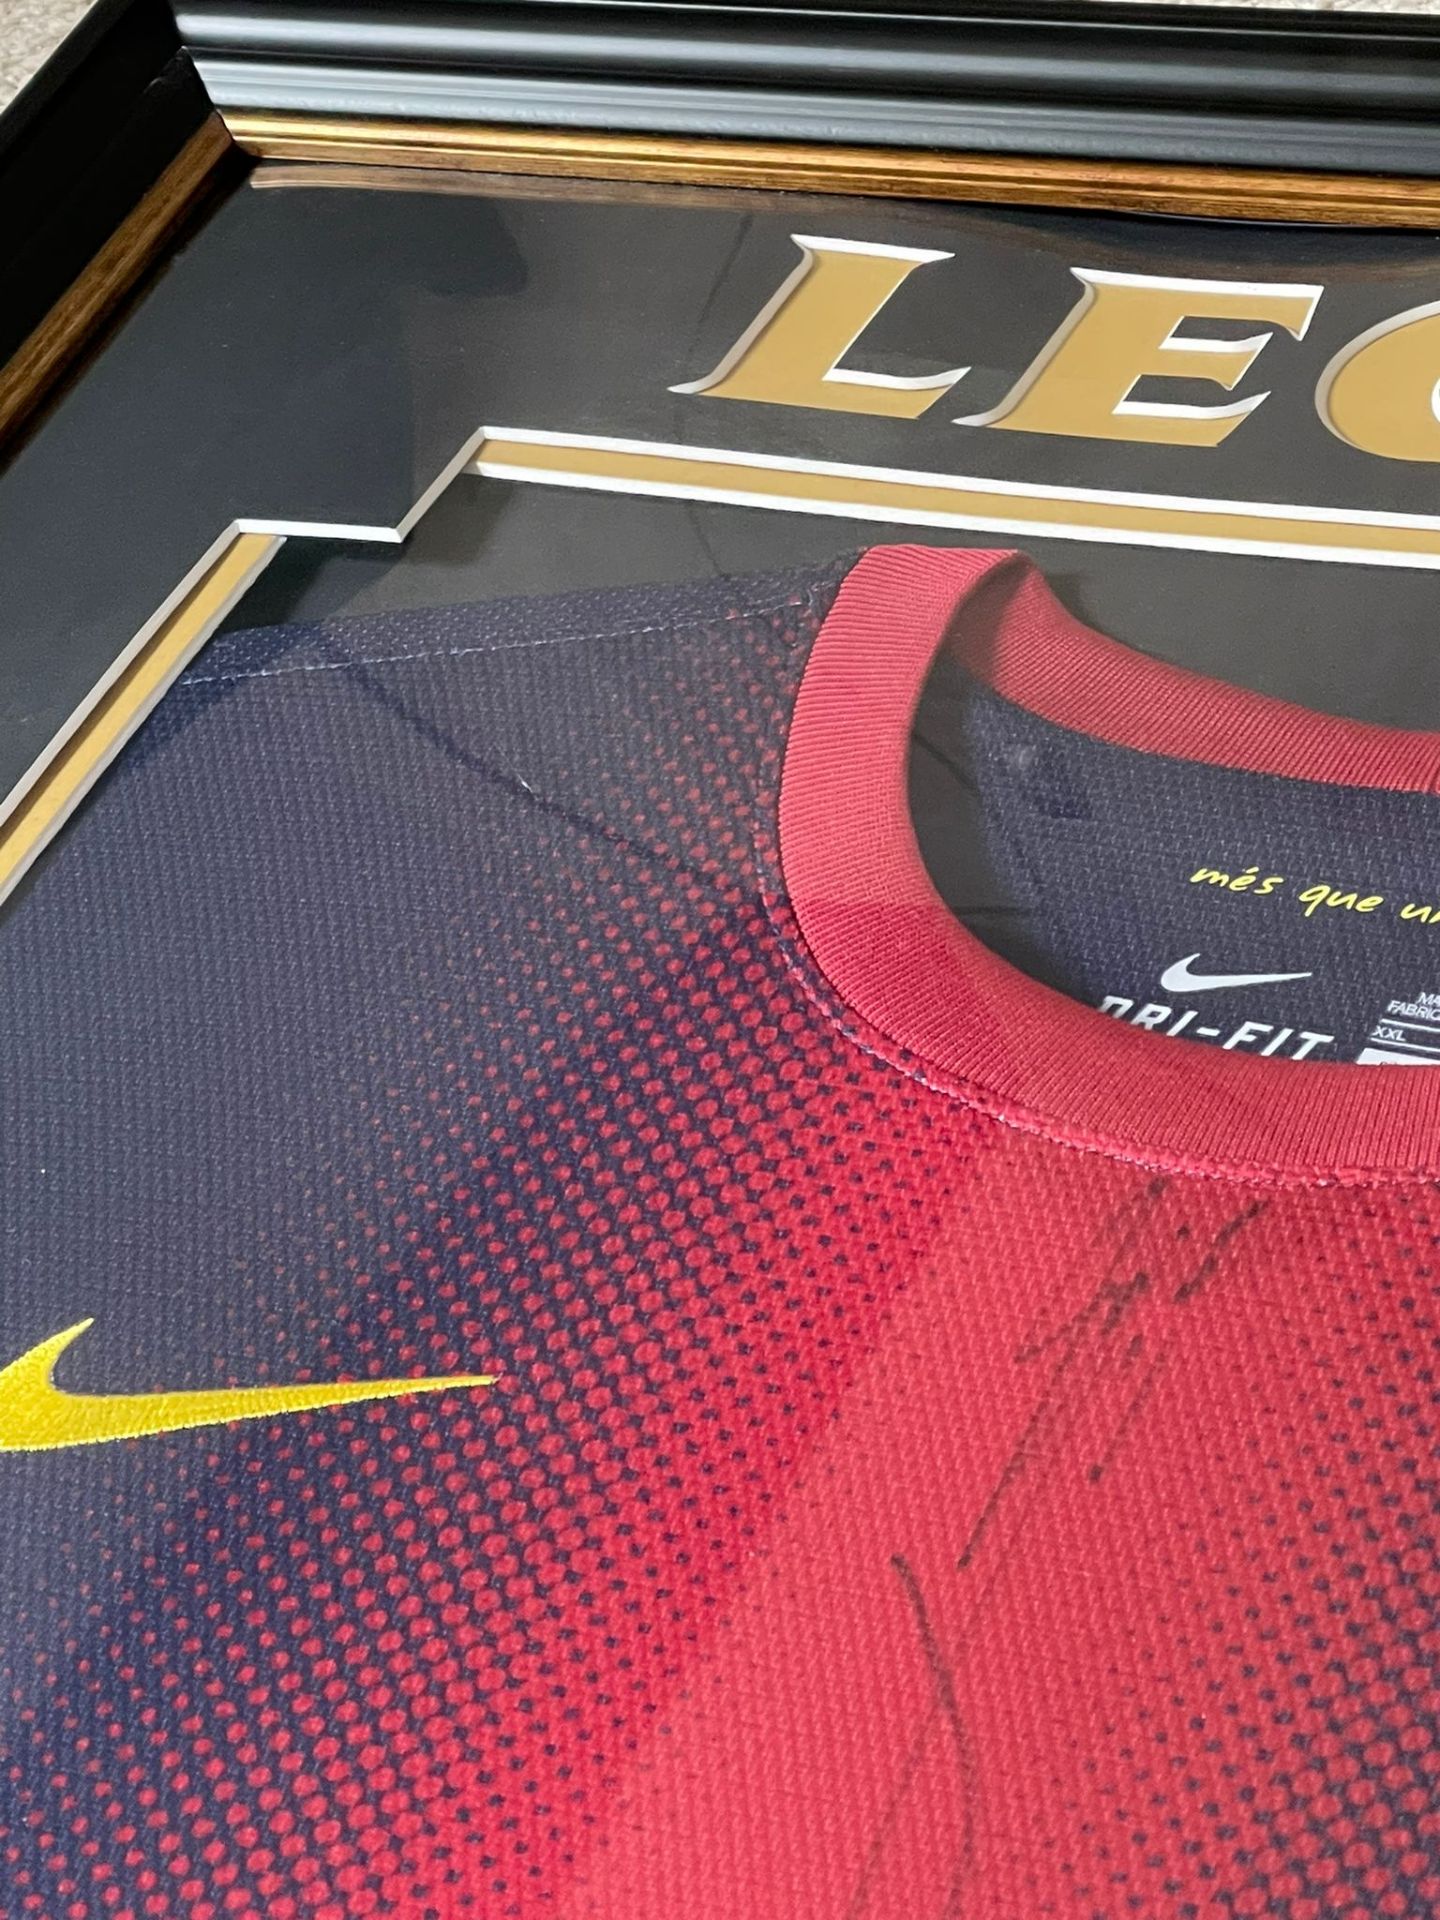 HAND SIGNED, BEAUTIFULLY FRAMED â€˜MESSIâ€™ SHIRT WITH COA - NO VAT! - Image 5 of 9